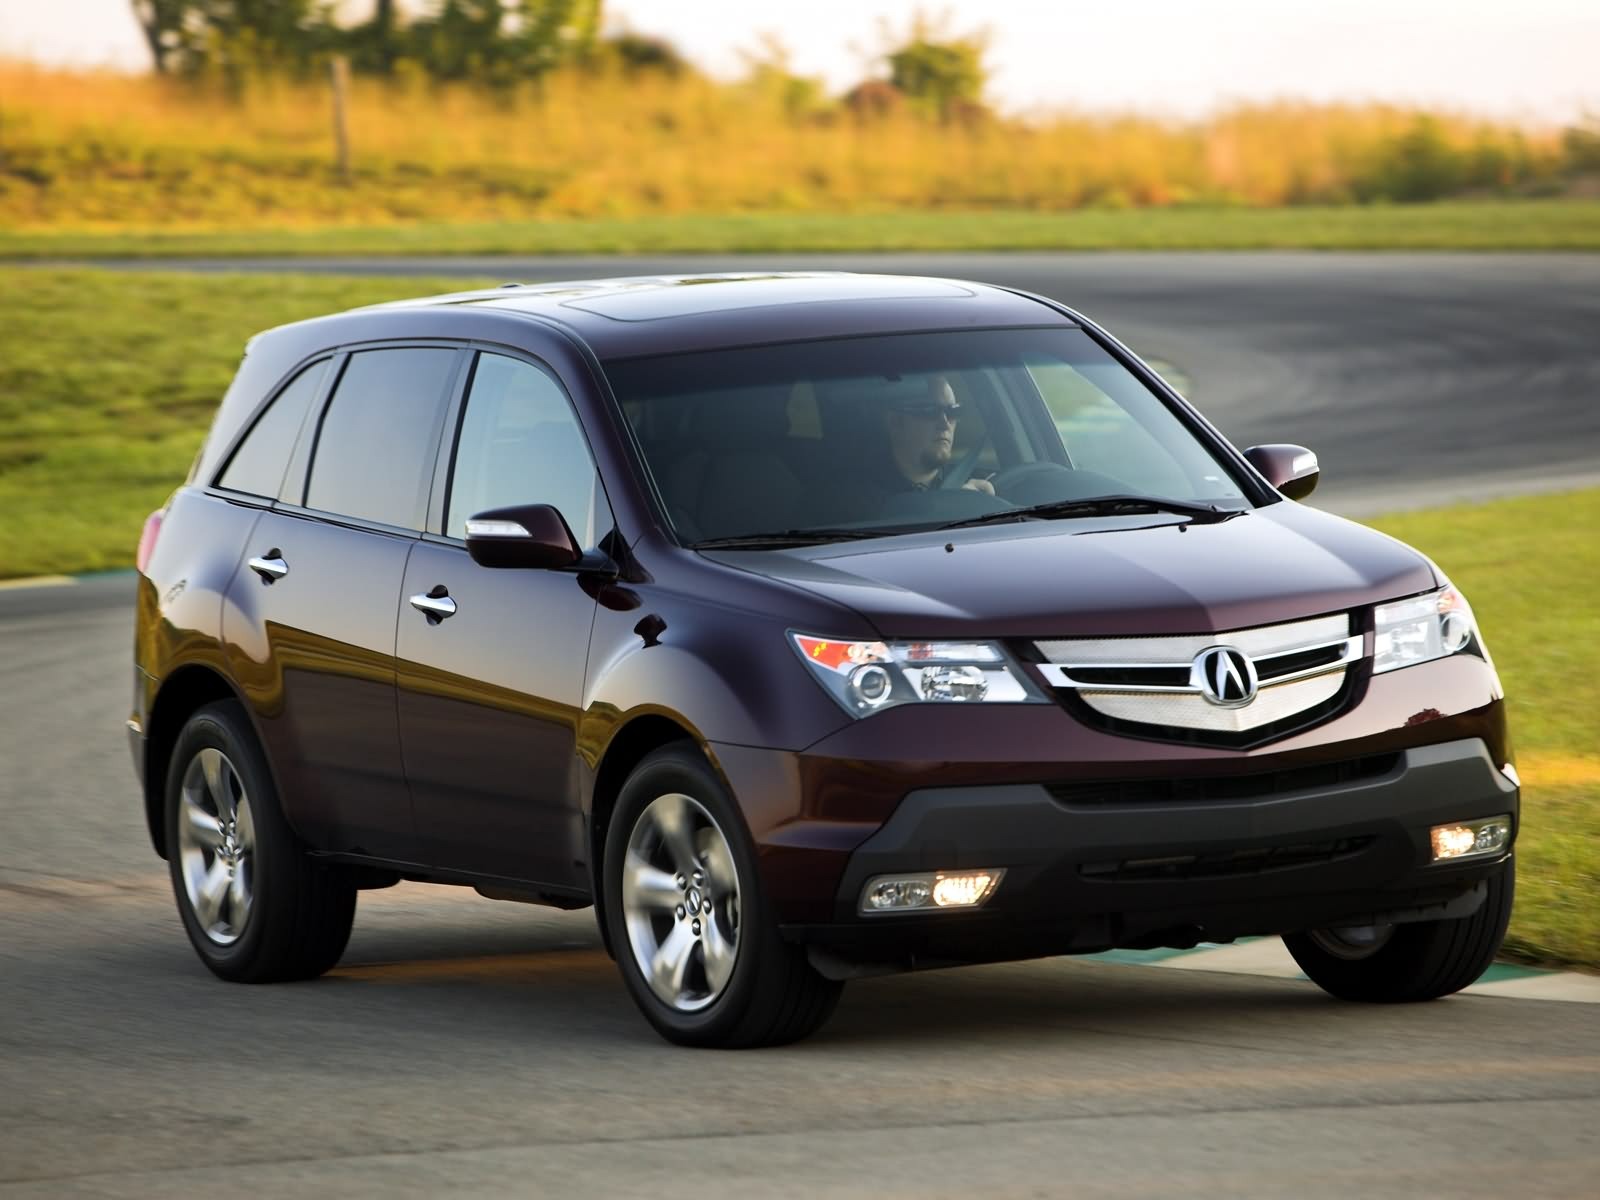 Acura MDX sport utility vehicle wallpapers #17 - 1600x1200